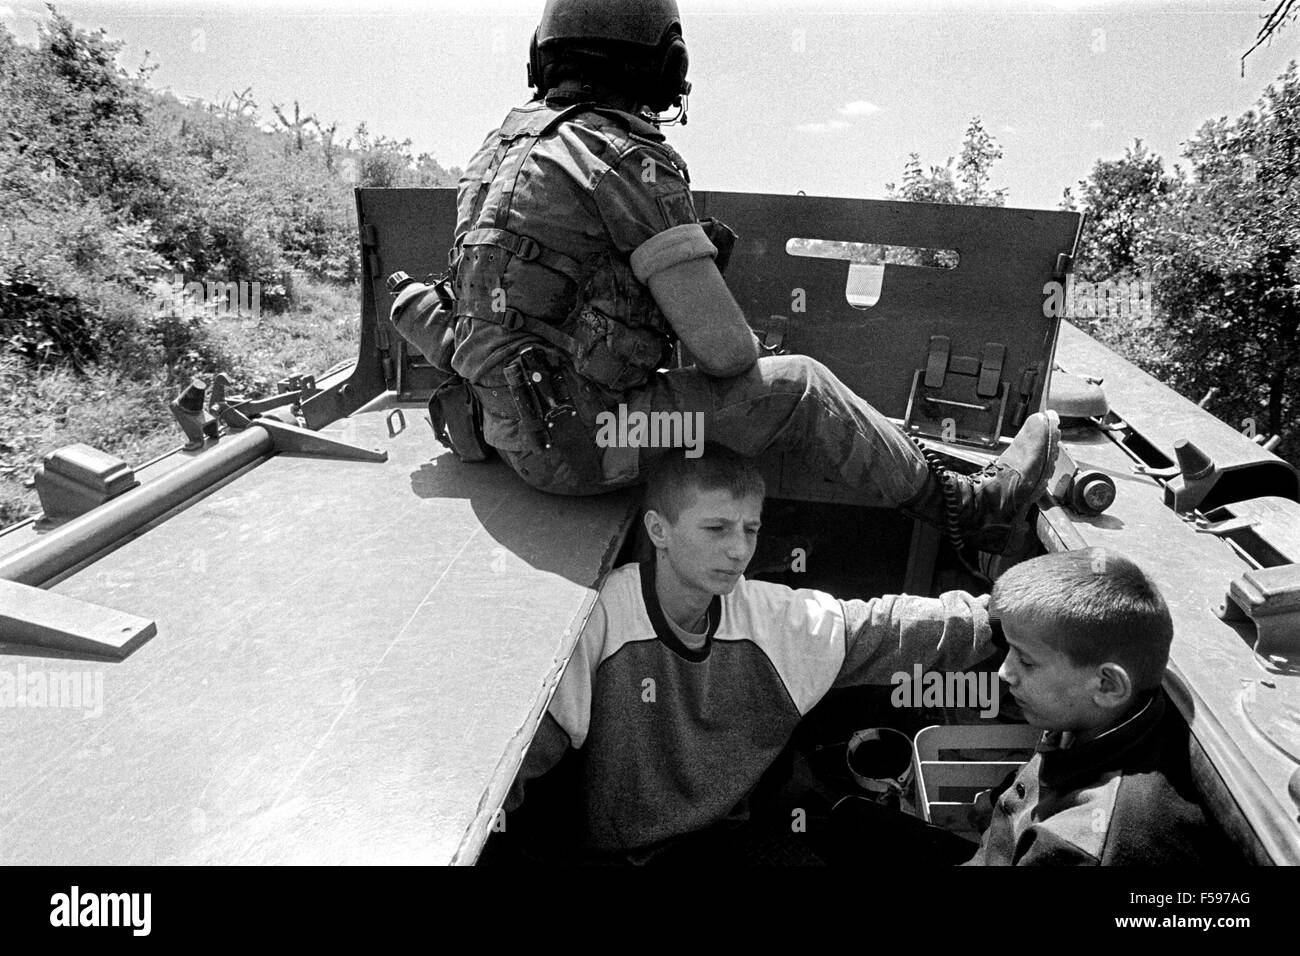 NATO intervention in Kosovo, July 2000, Spanish soldiers managing a school for Serbian children living in an Albanian area Stock Photo